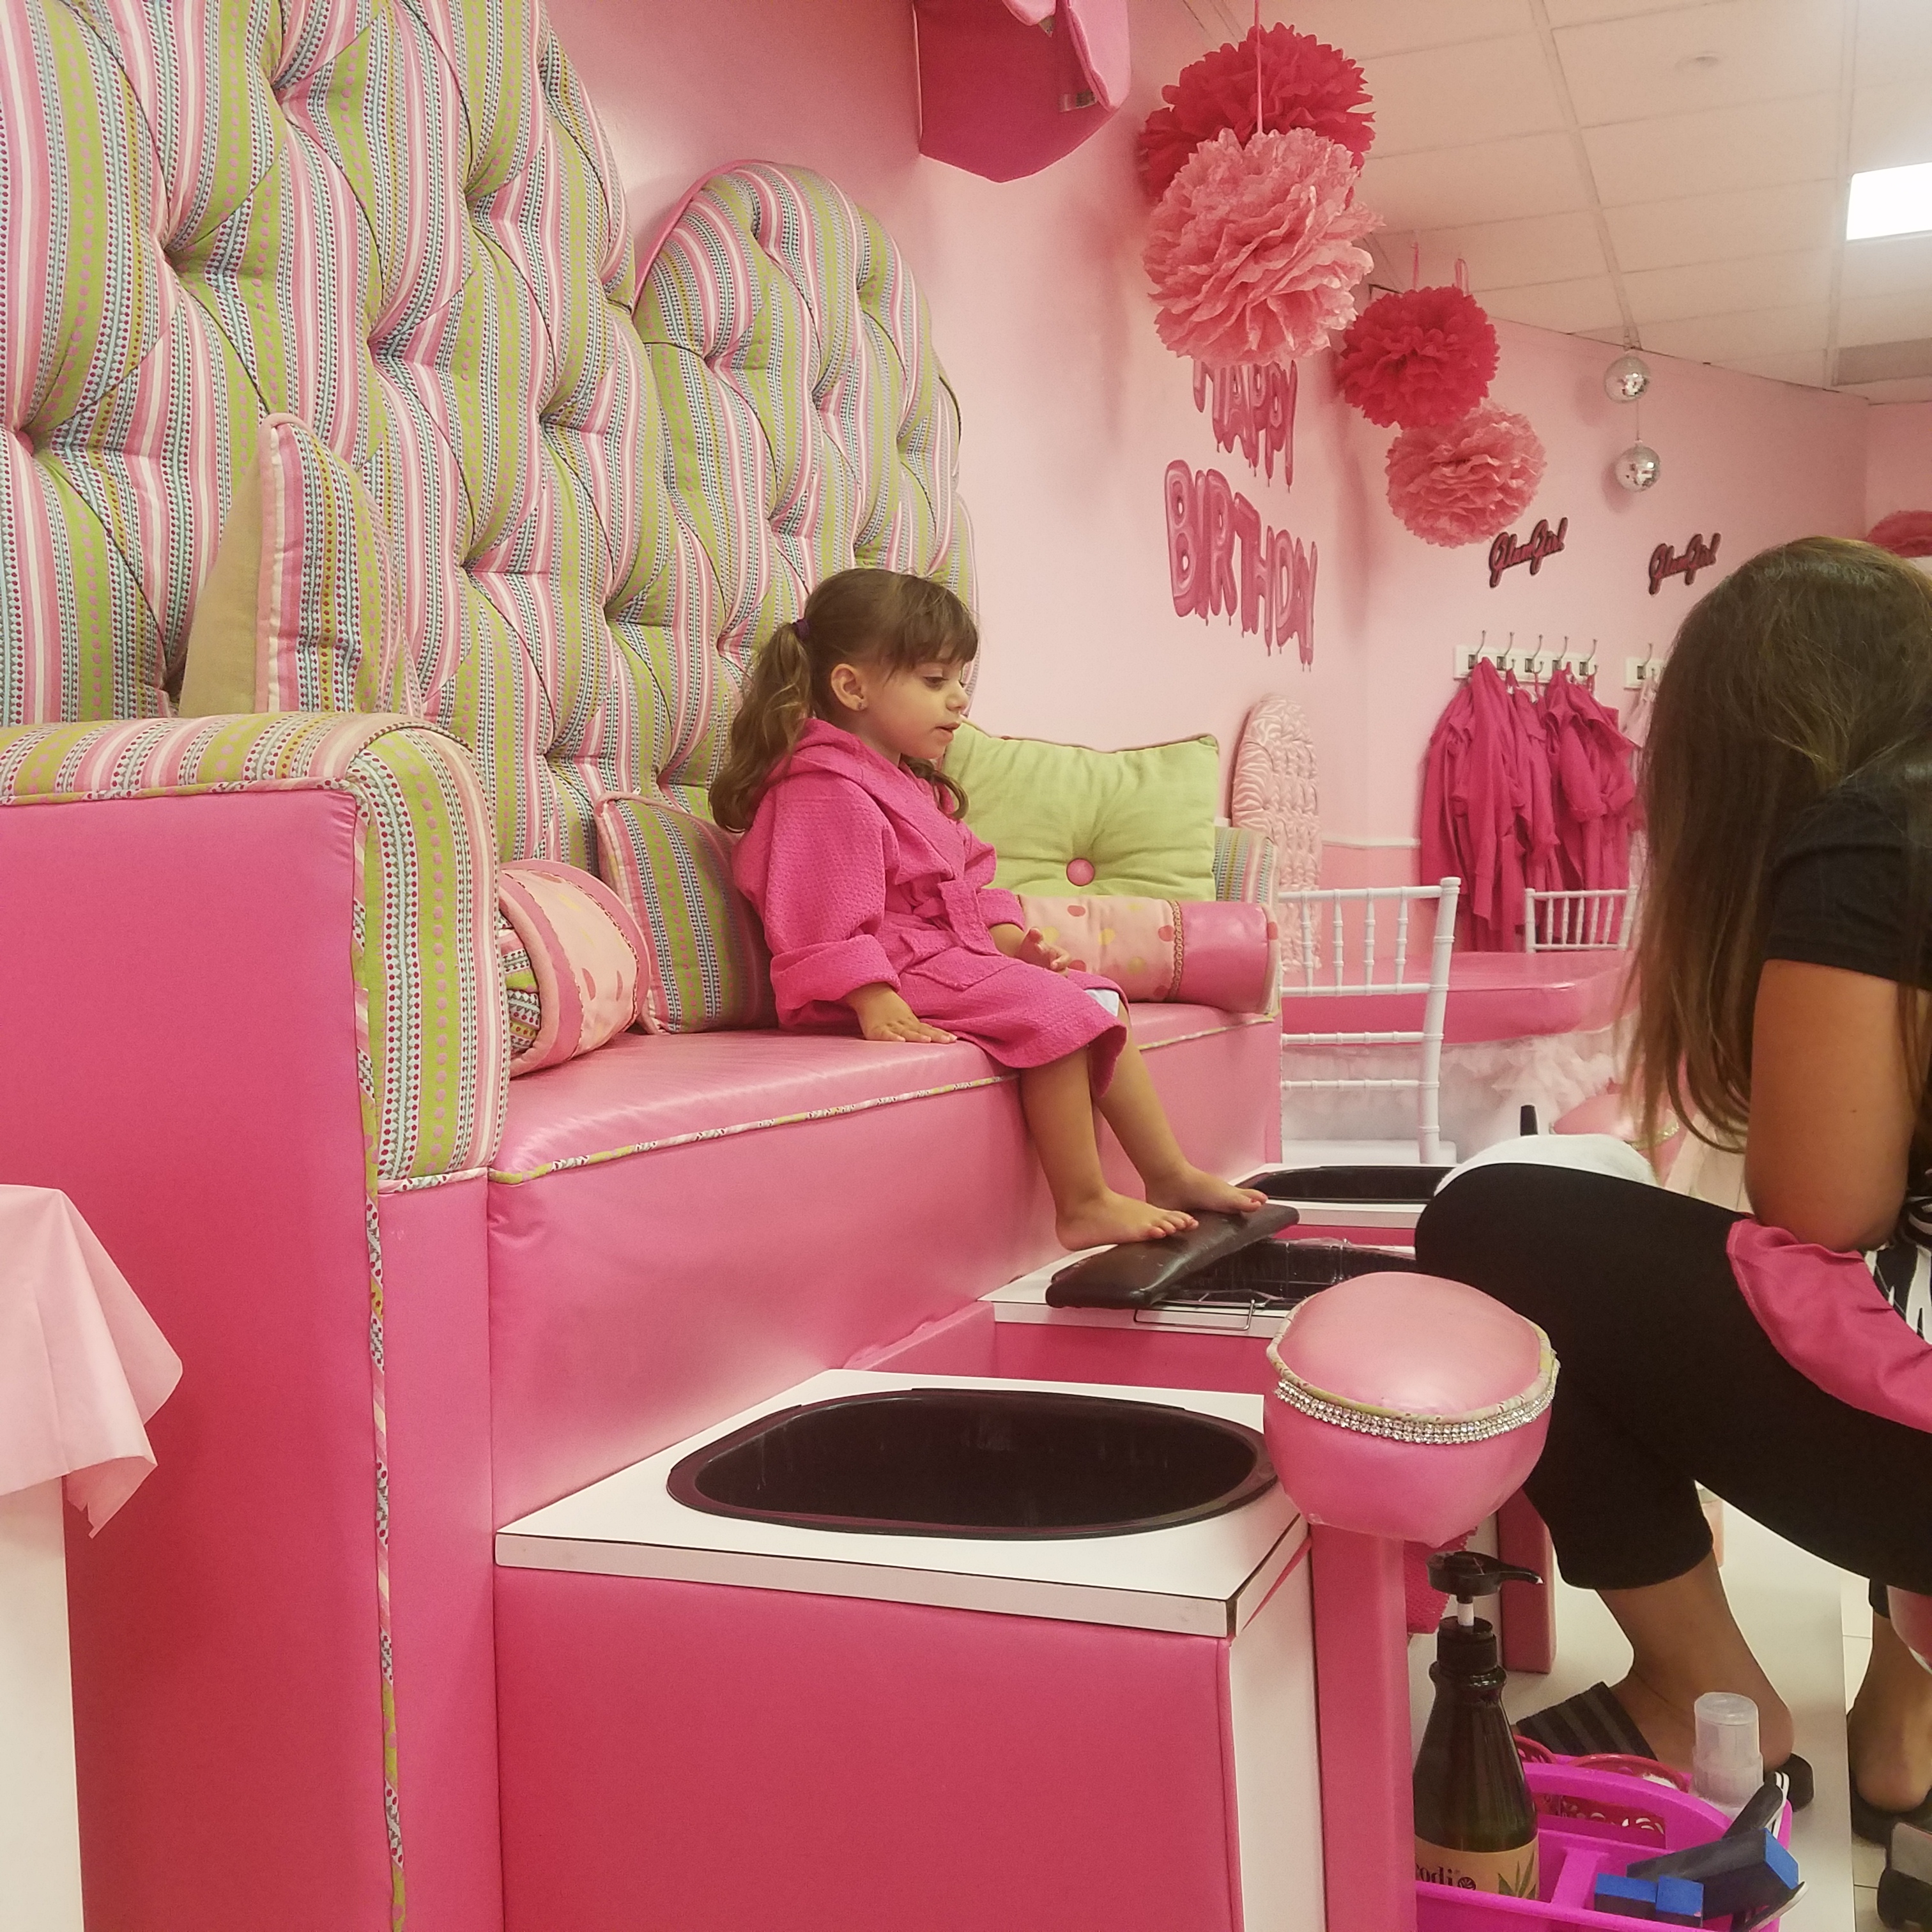 Diva Nails & Spa: A Relaxing and Fun Nail Salon for Kids | Apopka, FL 32703